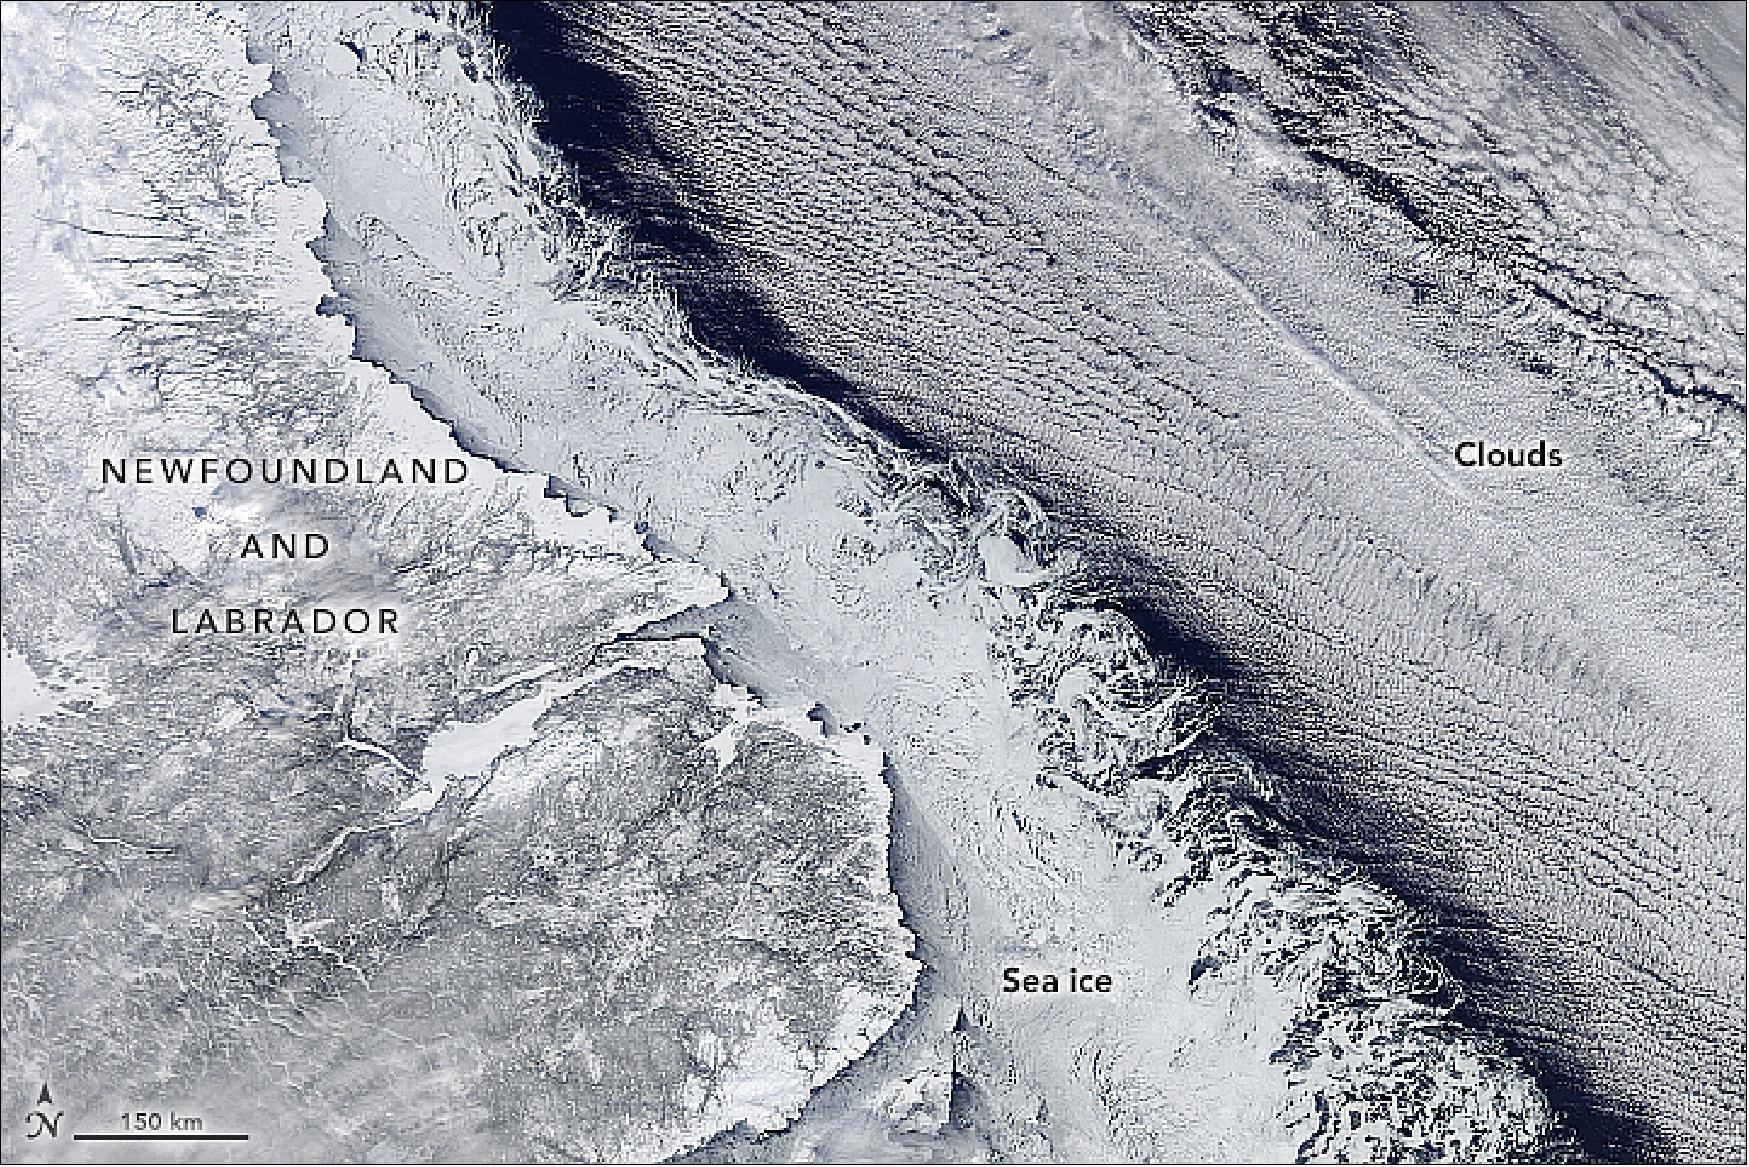 Figure 32: This MODIS image was acquired on 18 Feb. 2018 showing the coastline of Newfoundland and Labrador, the sea ice edge, and offshore clouds all present a clear edge to distinguish one from the next (image credit: NASA Earth Observatory, image by Jeff Schmaltz, LANCE/EOSDIS Rapid Response. Story by Mike Carlowicz, with image interpretation from Walt Meier, NSIDC, and Claire Parkinson, NASA/GSFC)